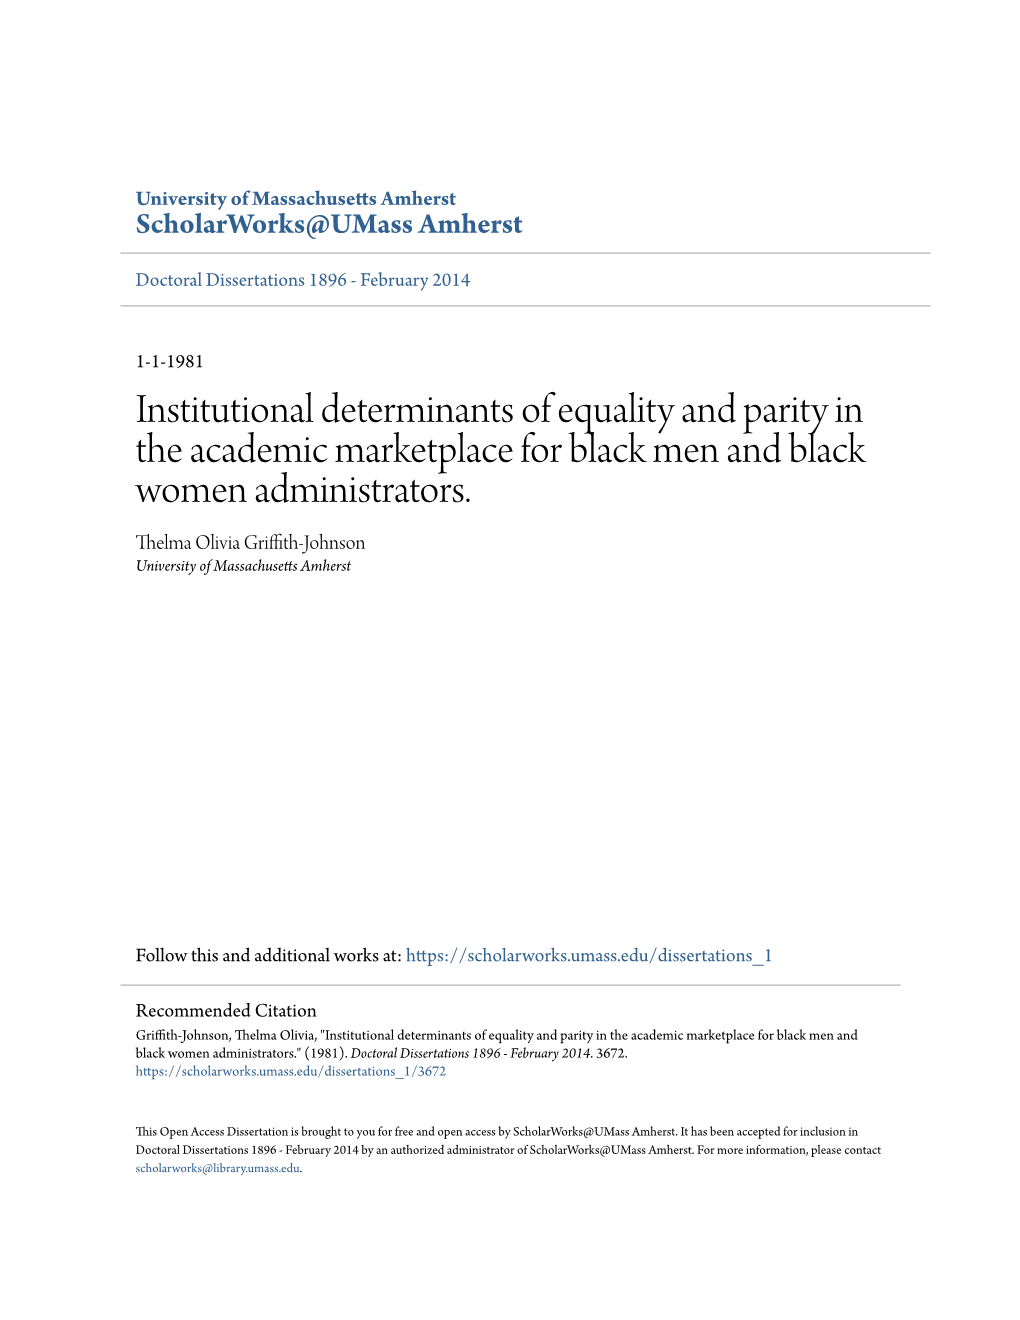 Institutional Determinants of Equality and Parity in the Academic Marketplace for Black Men and Black Women Administrators